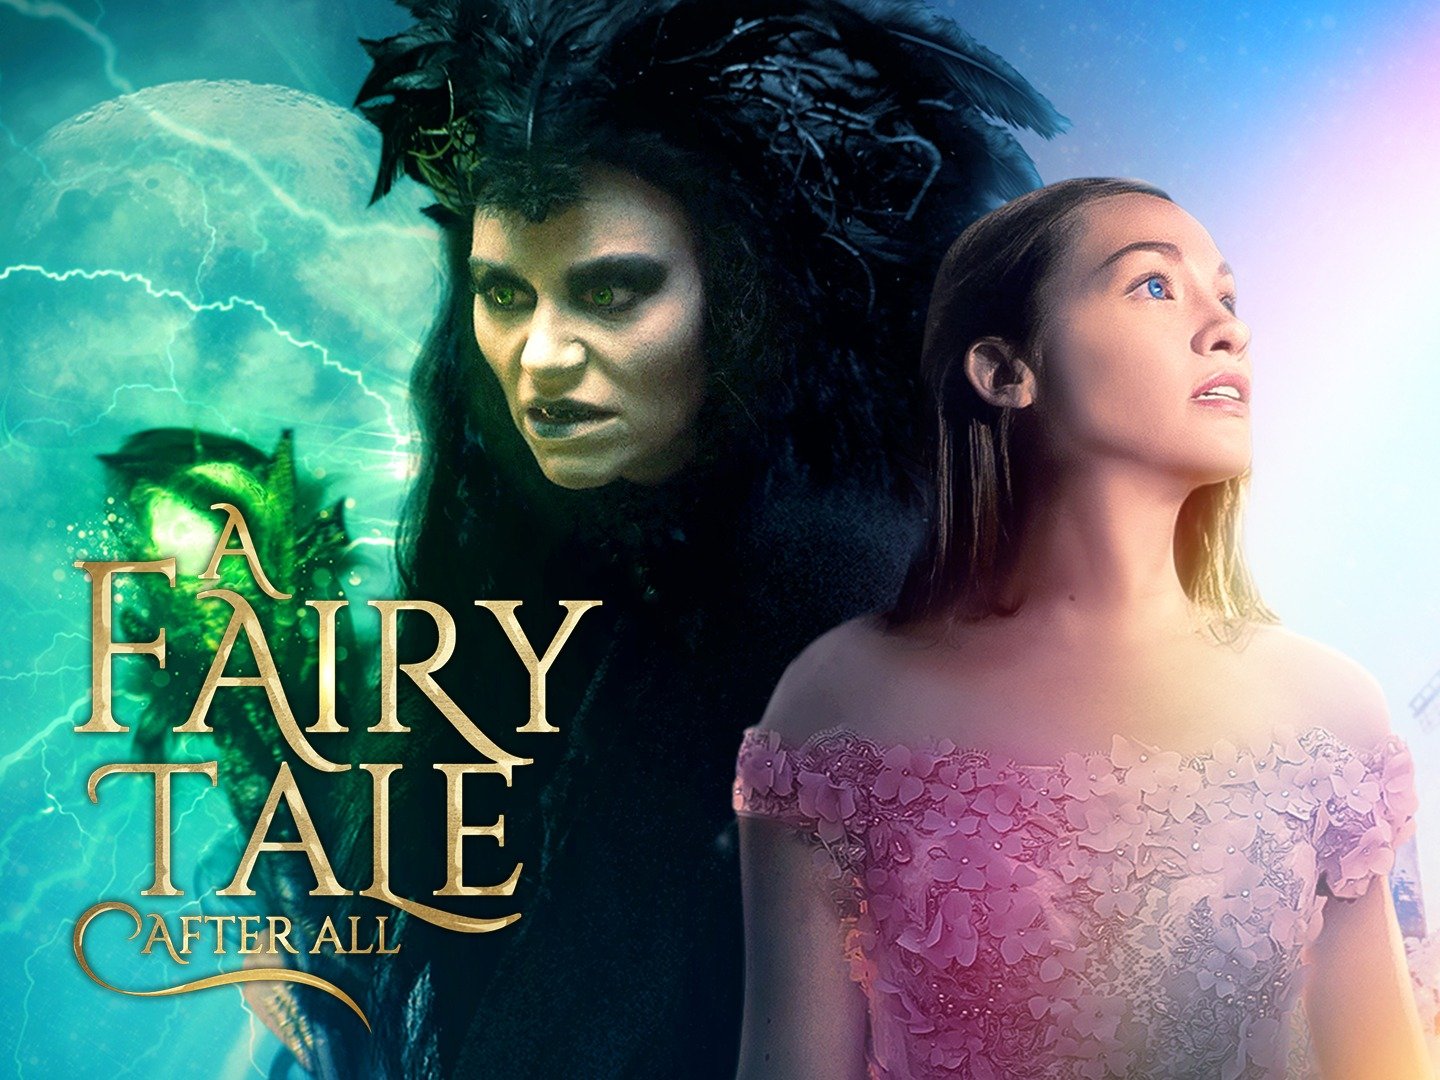 A Fairy Tale After All: Trailer 1 - Trailers & Videos - Rotten Tomatoes